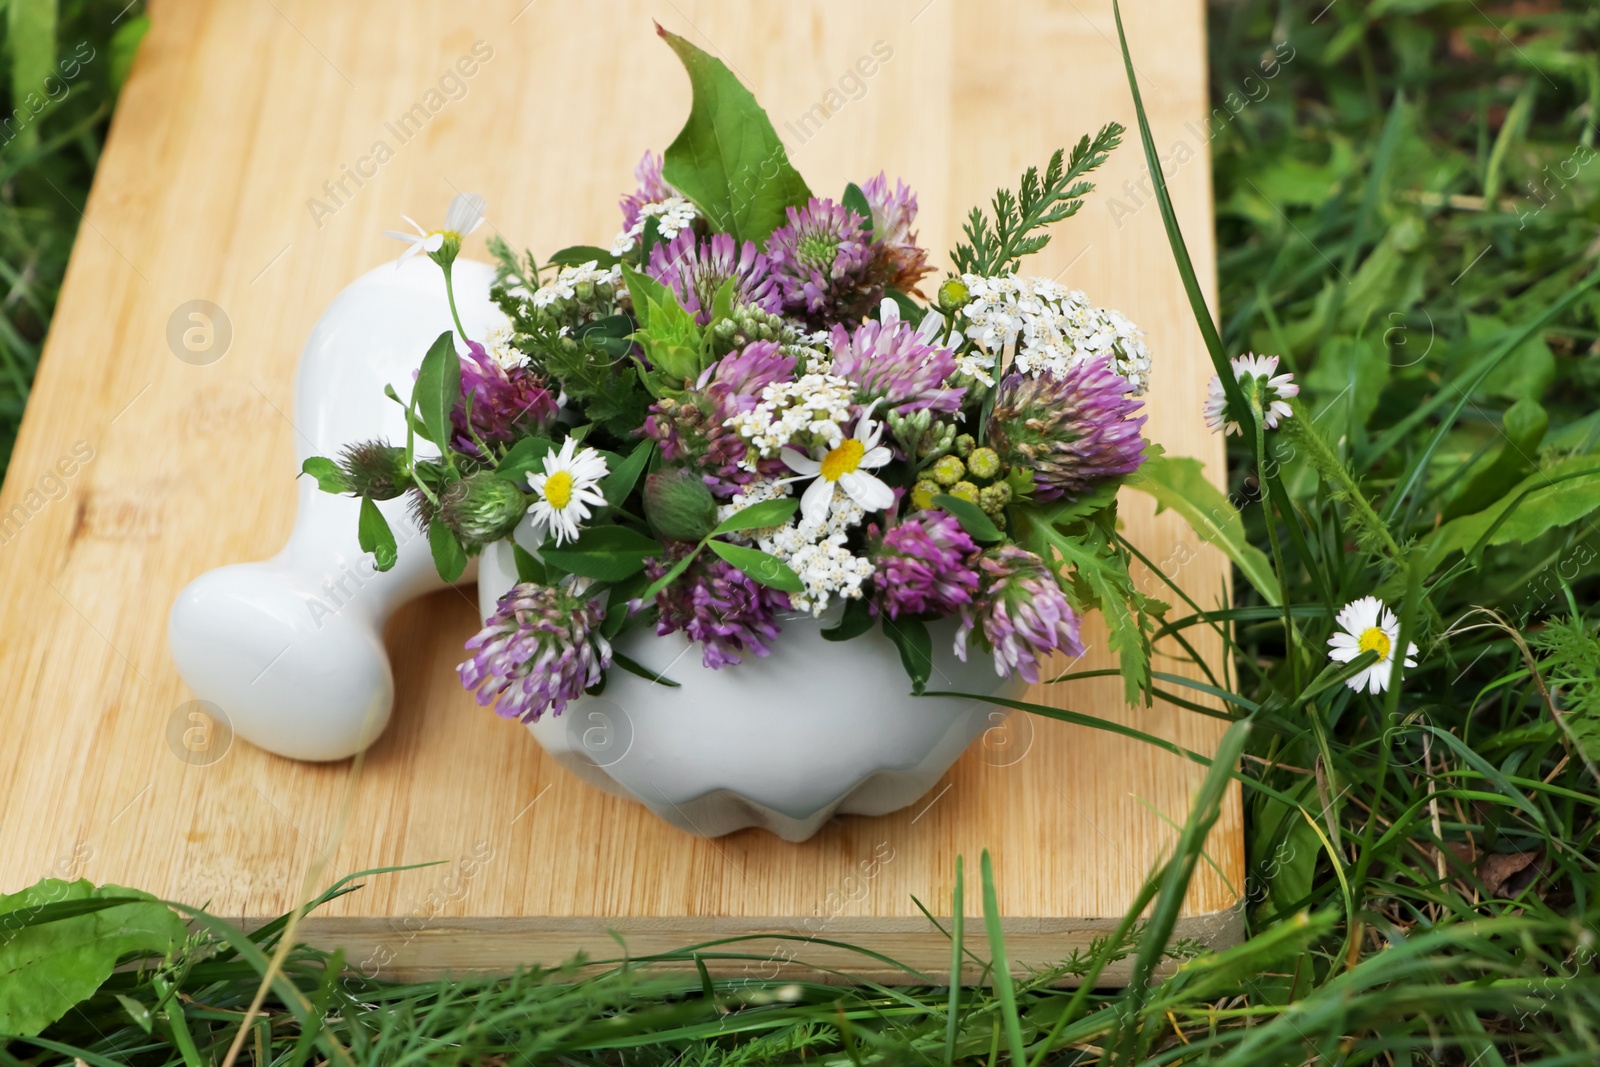 Photo of Ceramic mortar with pestle, different wildflowers and herbs on green grass